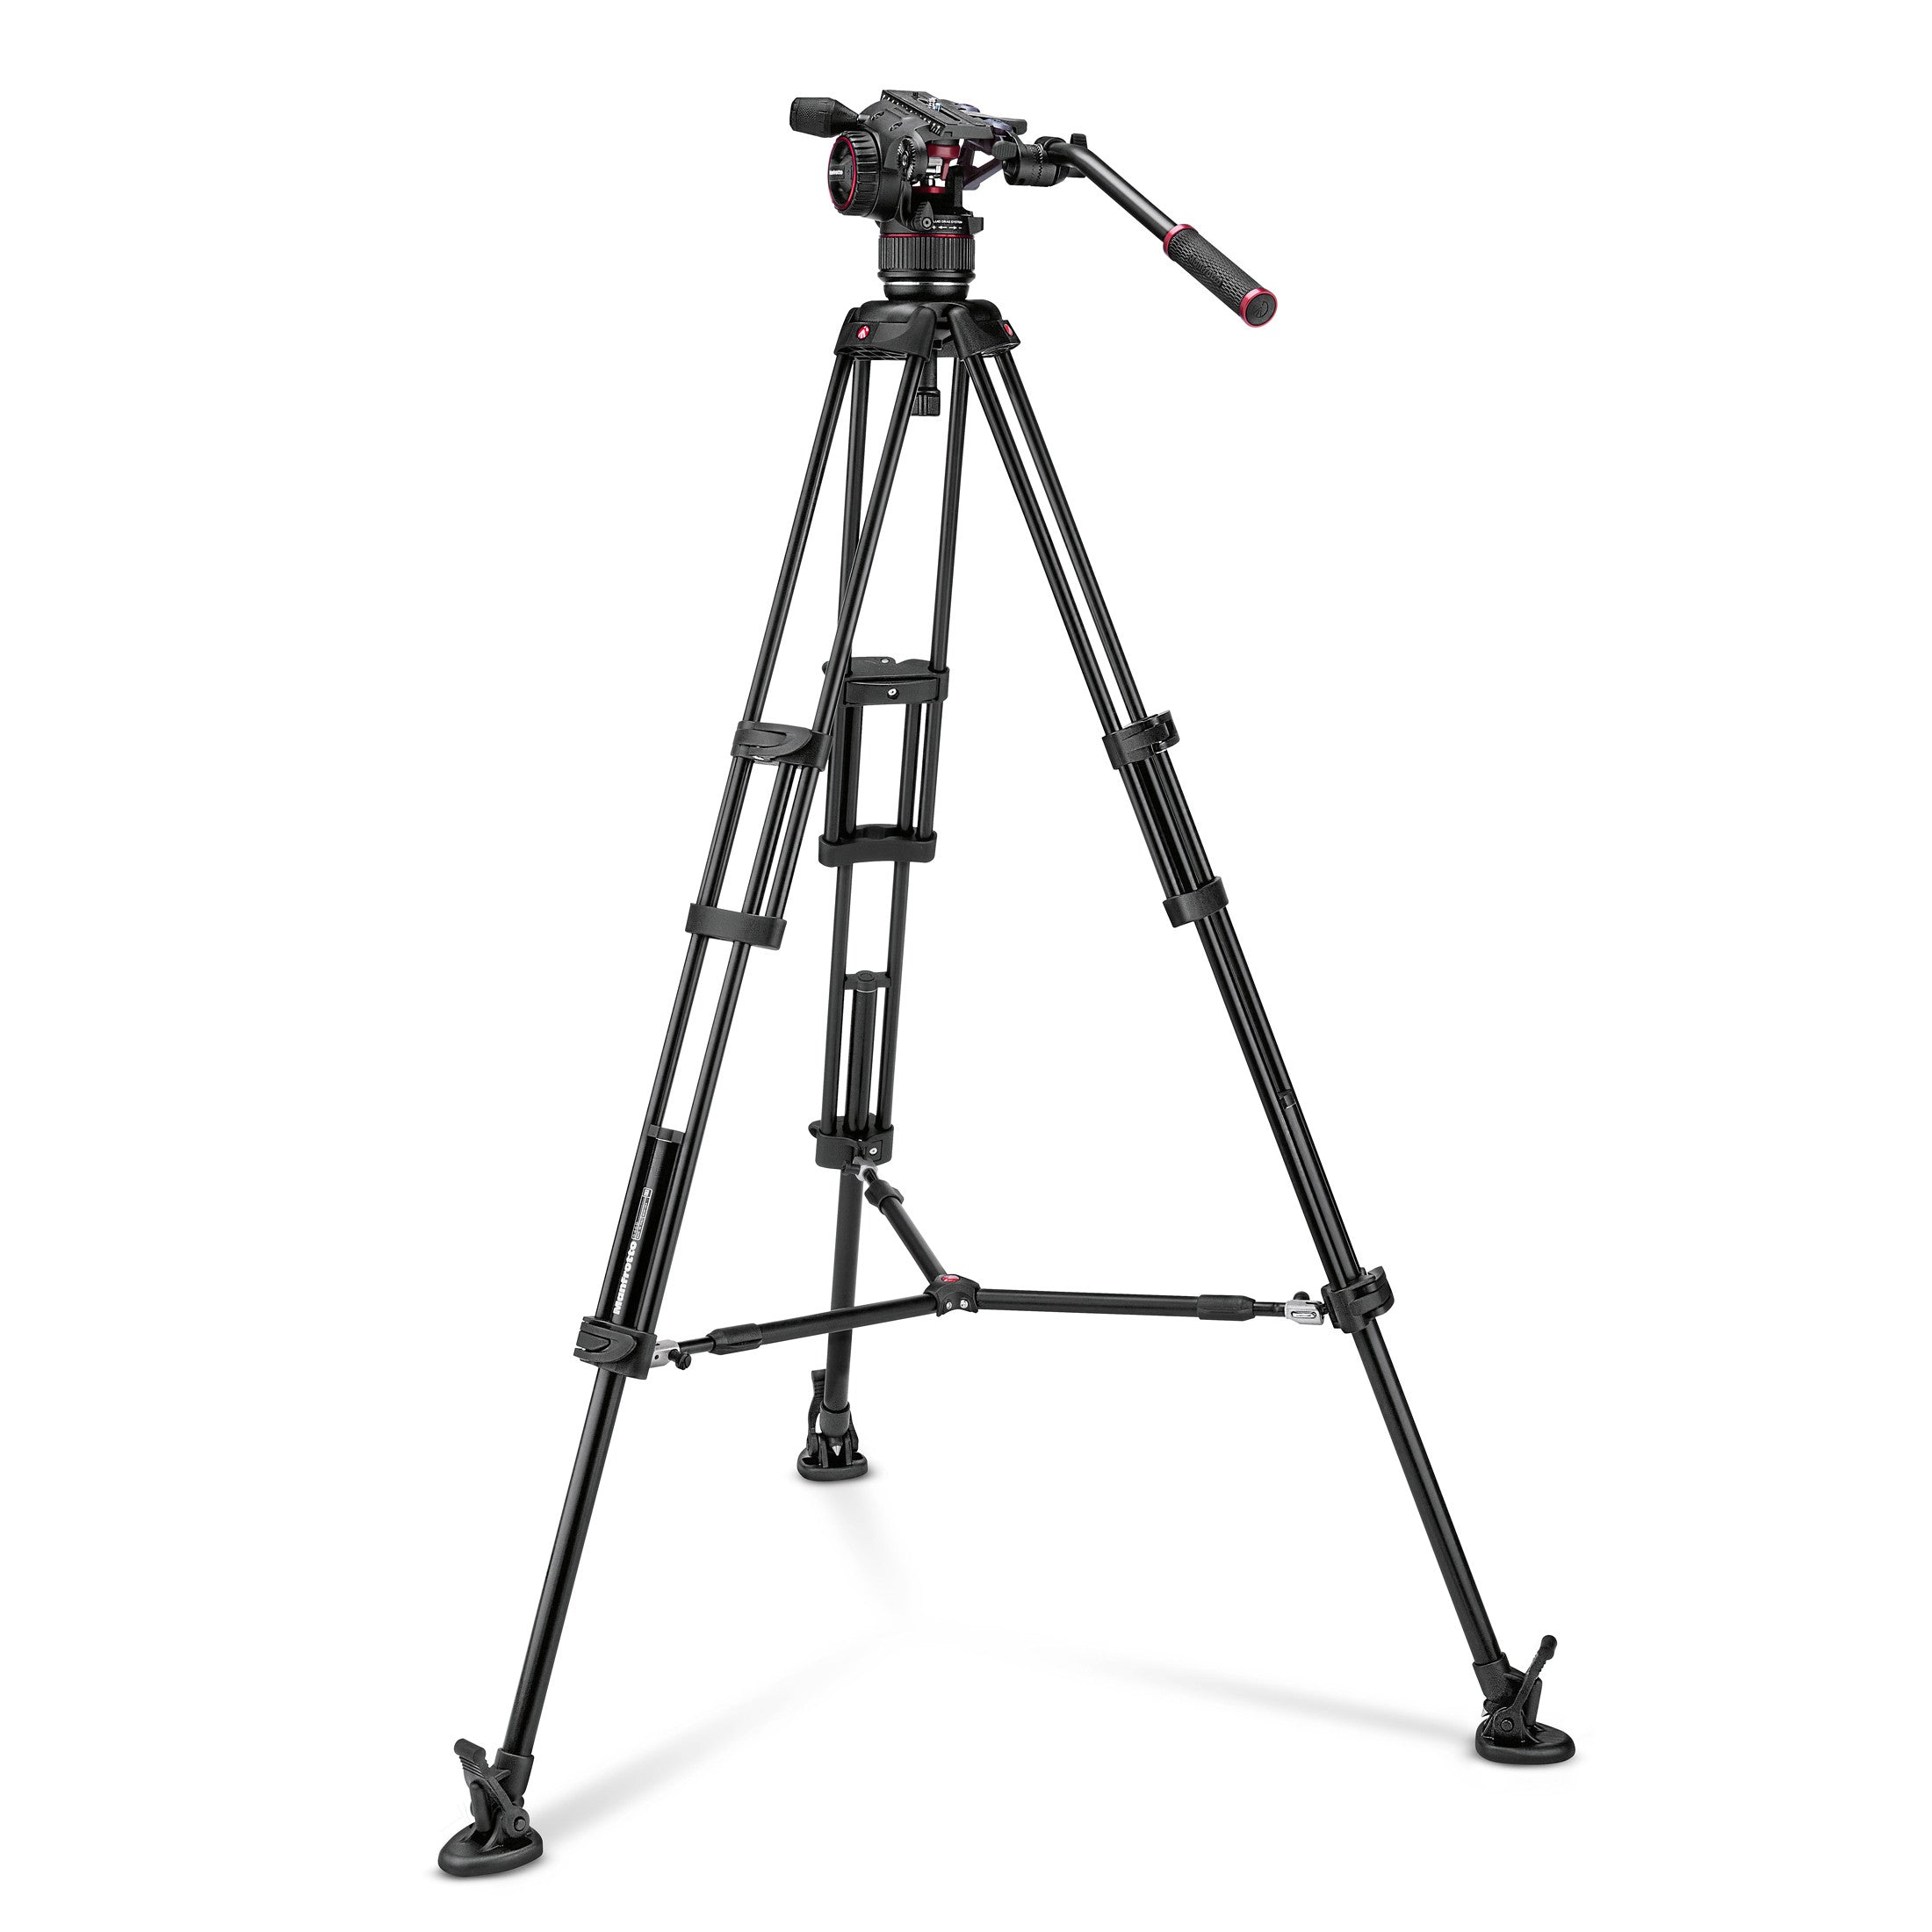 Manfrotto MVKN8TWINMUS Video Kit with Nitrotech N8 Head & 546B Twin Leg with Mid-Level Spreader Tripod